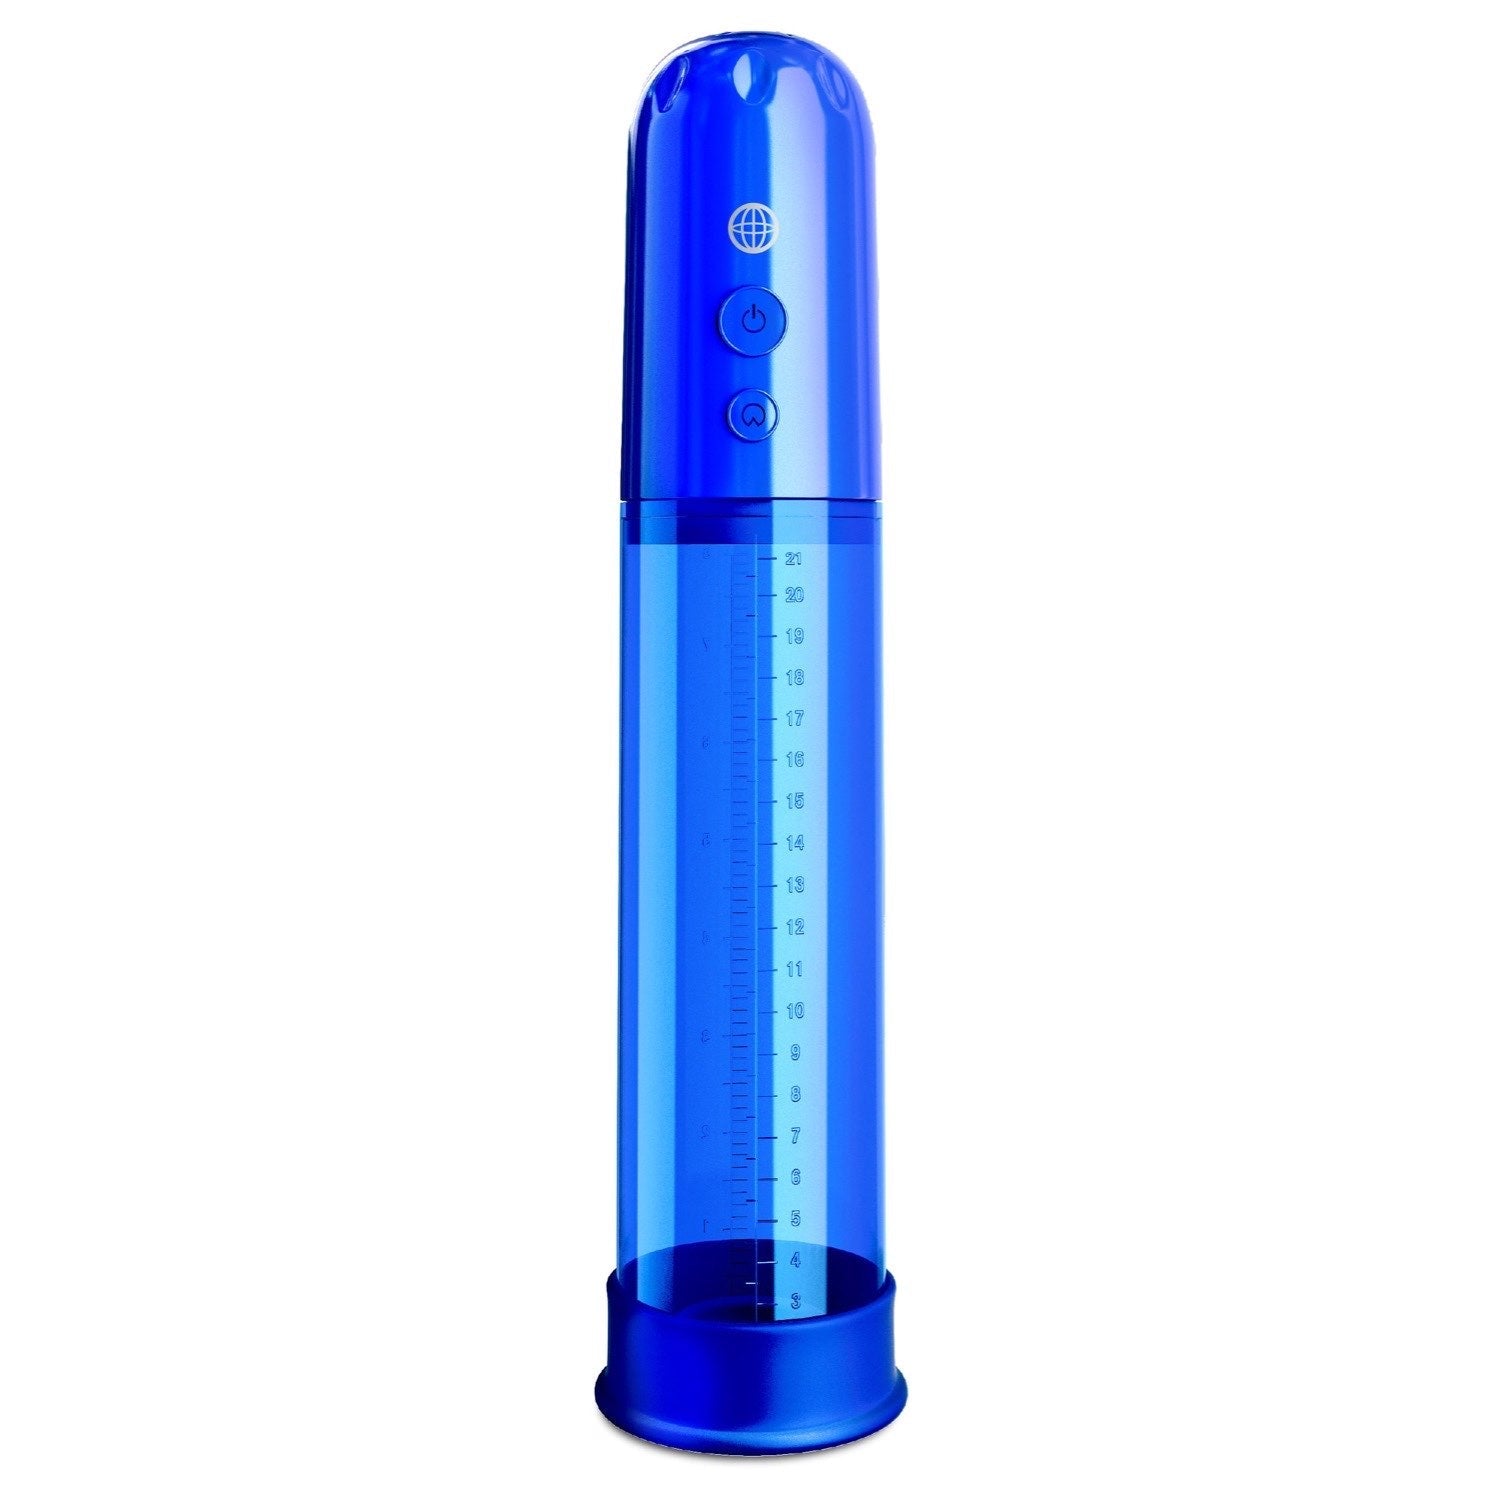 Classix Auto-Vac Power Pump - Blue Powered Penis Pump by Pipedream